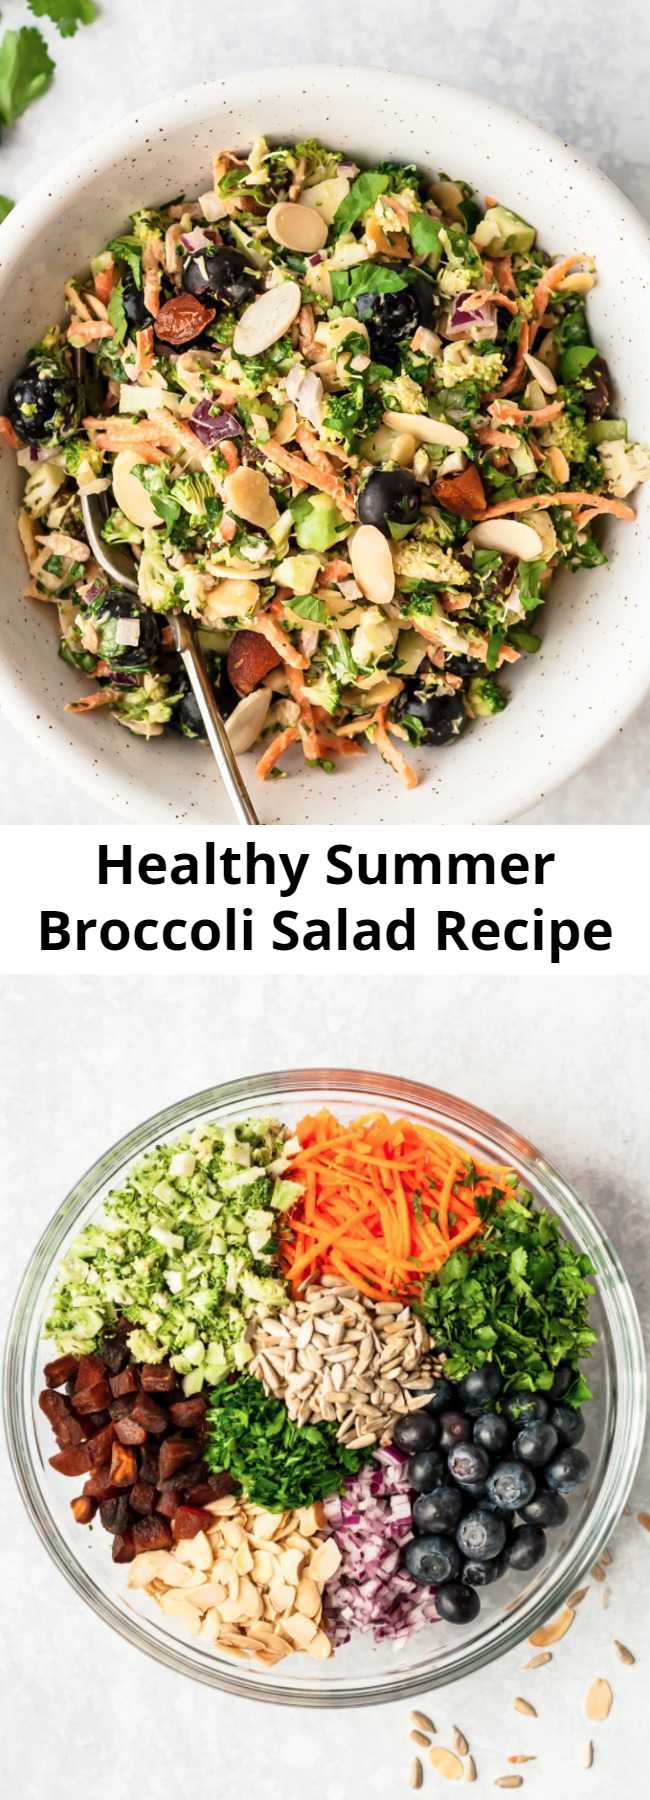 Healthy Summer Broccoli Salad Recipe - Delicious, healthy broccoli salad recipe made with simple ingredients like fresh blueberries, carrots, sweet dried apricots, almonds and sunflower seeds.This easy, vegetarian broccoli salad is tossed in a light tahini dressing and is perfect for summer parties or meal prep! #mealprep #broccoli #broccolisalad #saladrecipe #vegetarian #vegan #veganrecipe #healthysalad #summer